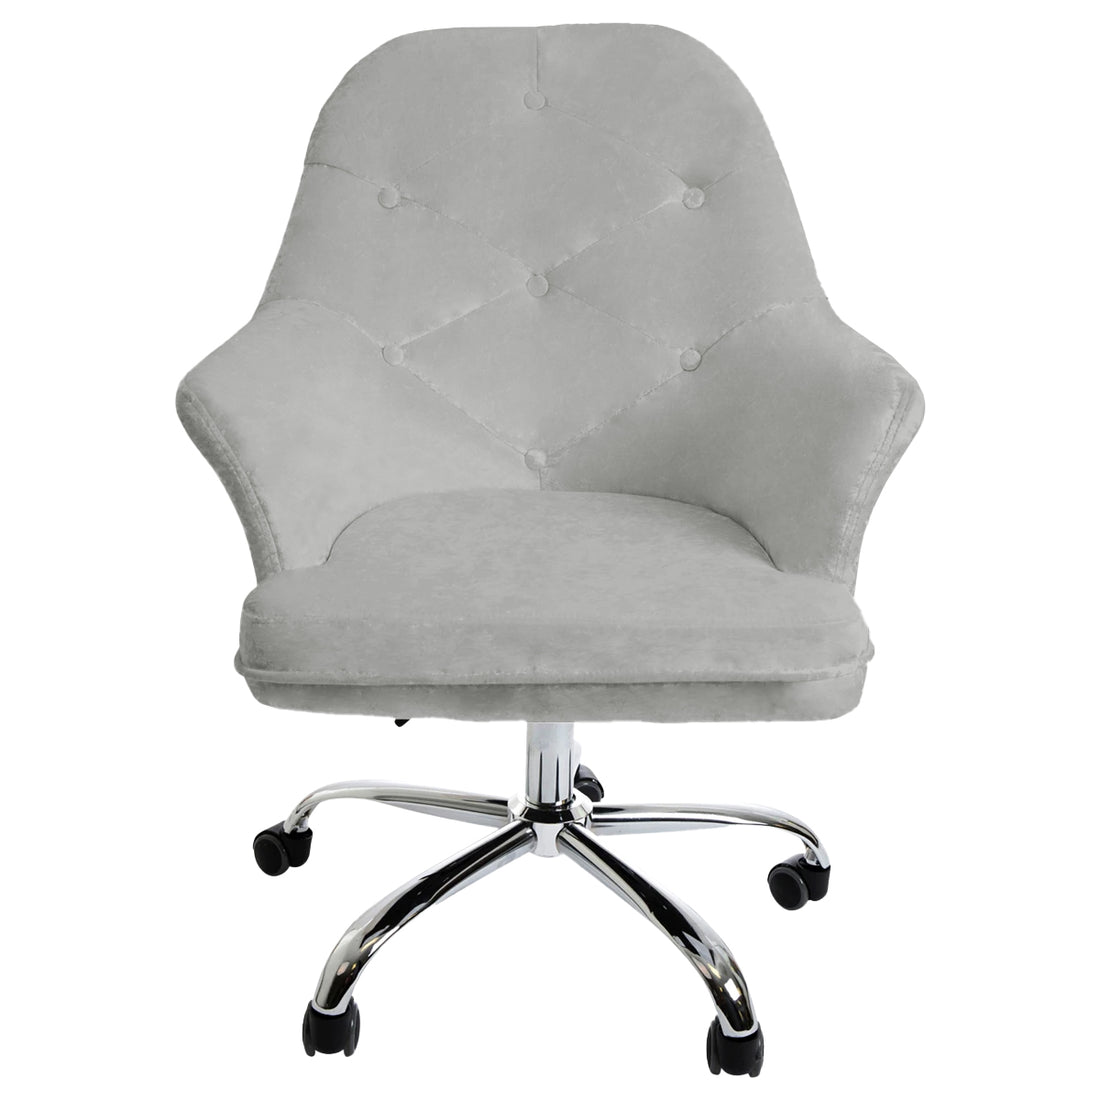 Impressions Michelle Tufted Vanity Chair with 360 Degree Swivel, Button Design Desk Seat with Five Non Marking Caste (Cool Gray)